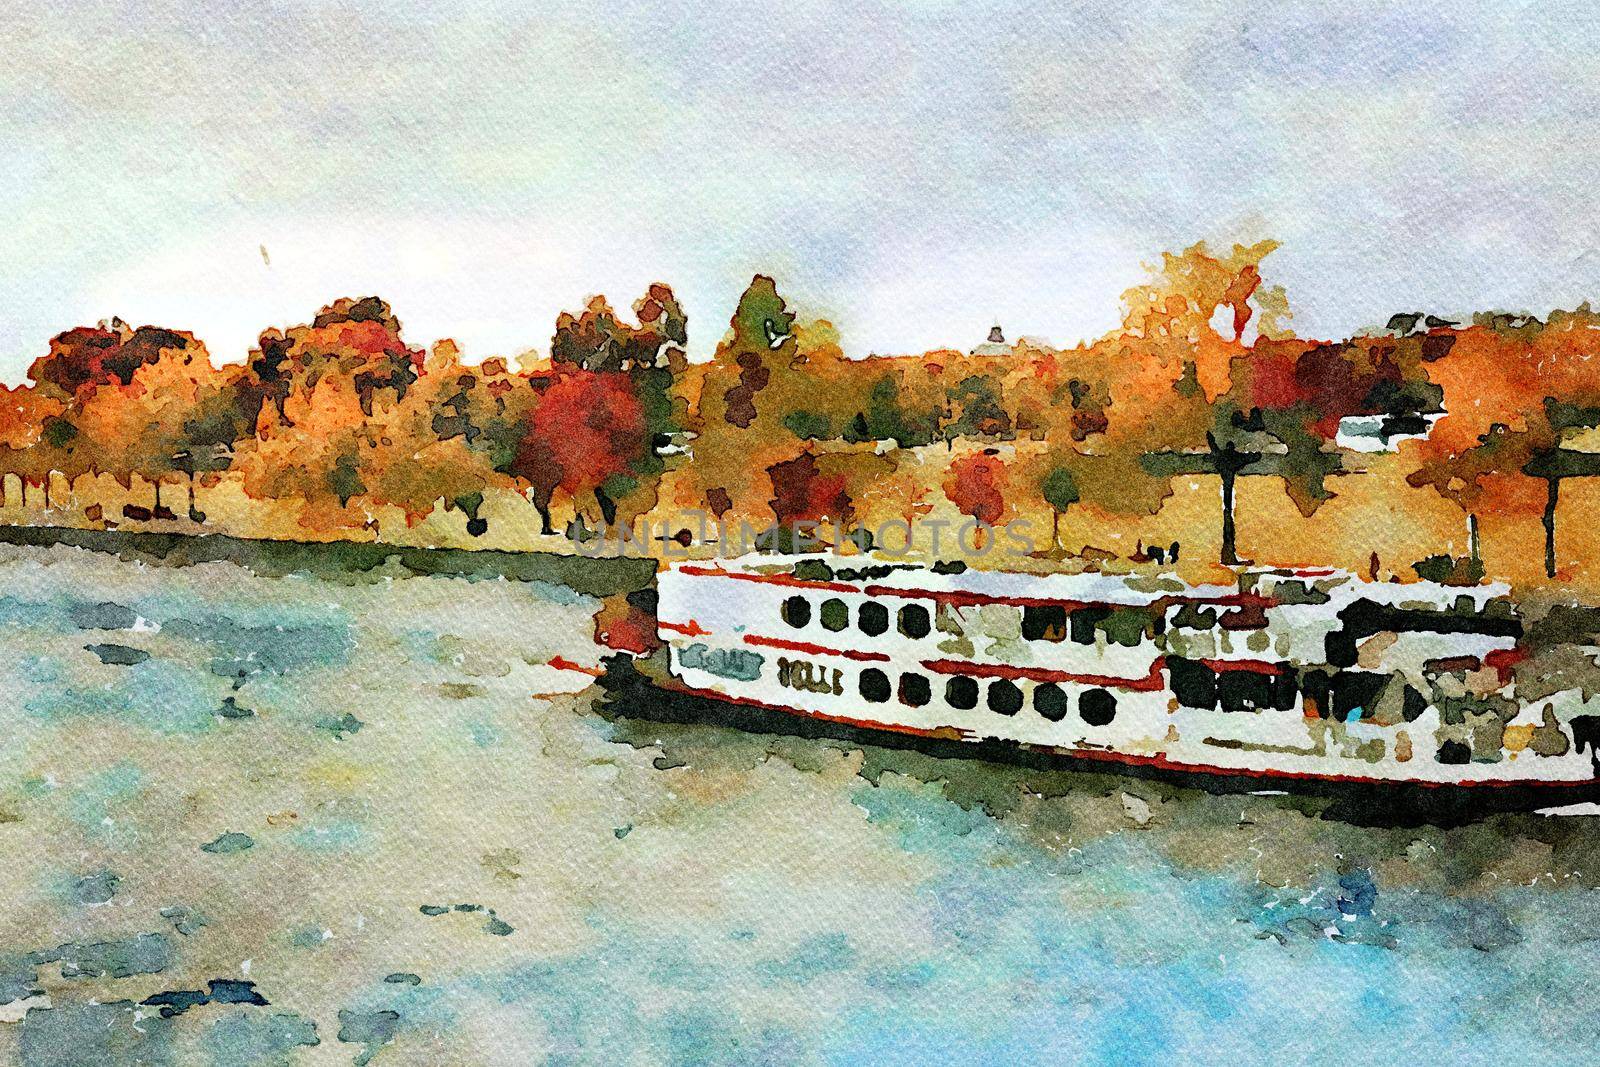 Watercolor representing a steamboat on the Seine in Paris in the autumn